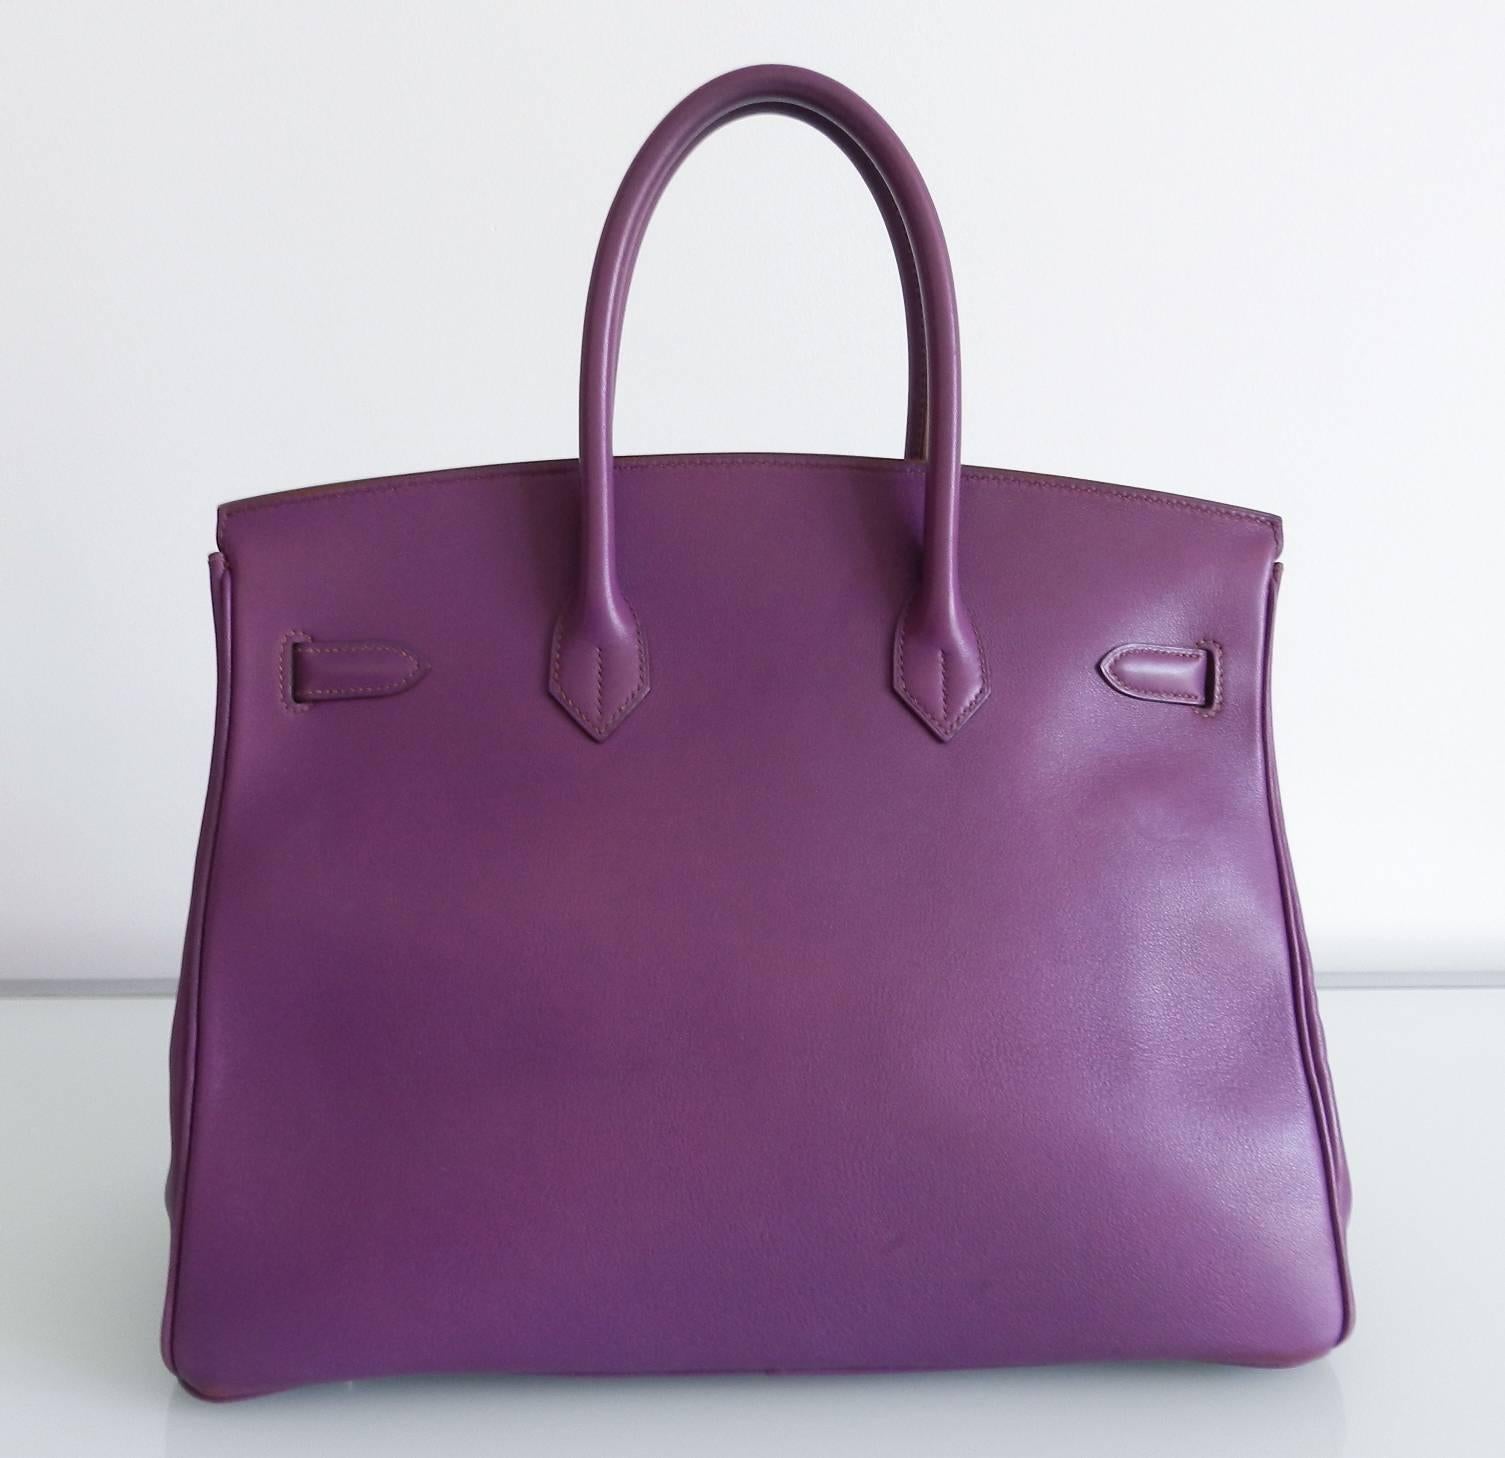 Hermes purple birkin 35cm in ultraviolet, swift leather, and palladium hardware. Date stamp E in square for year 2001.  Very good pre-owned condition with clean interior. Swift leather is smooth and this bag does show some wear at top of handles,